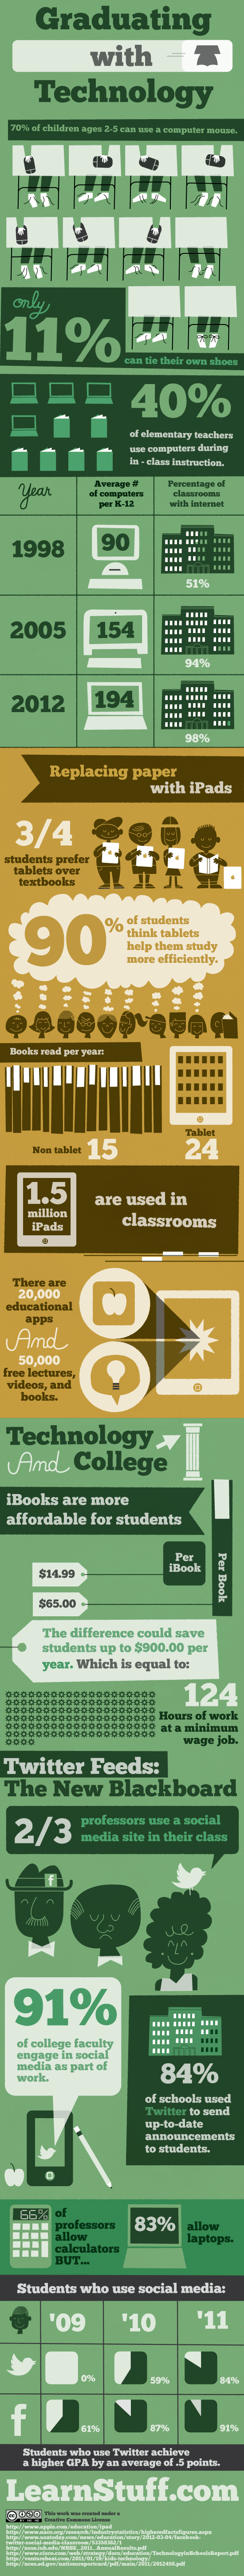 Graduating with Educational Technology Infographic